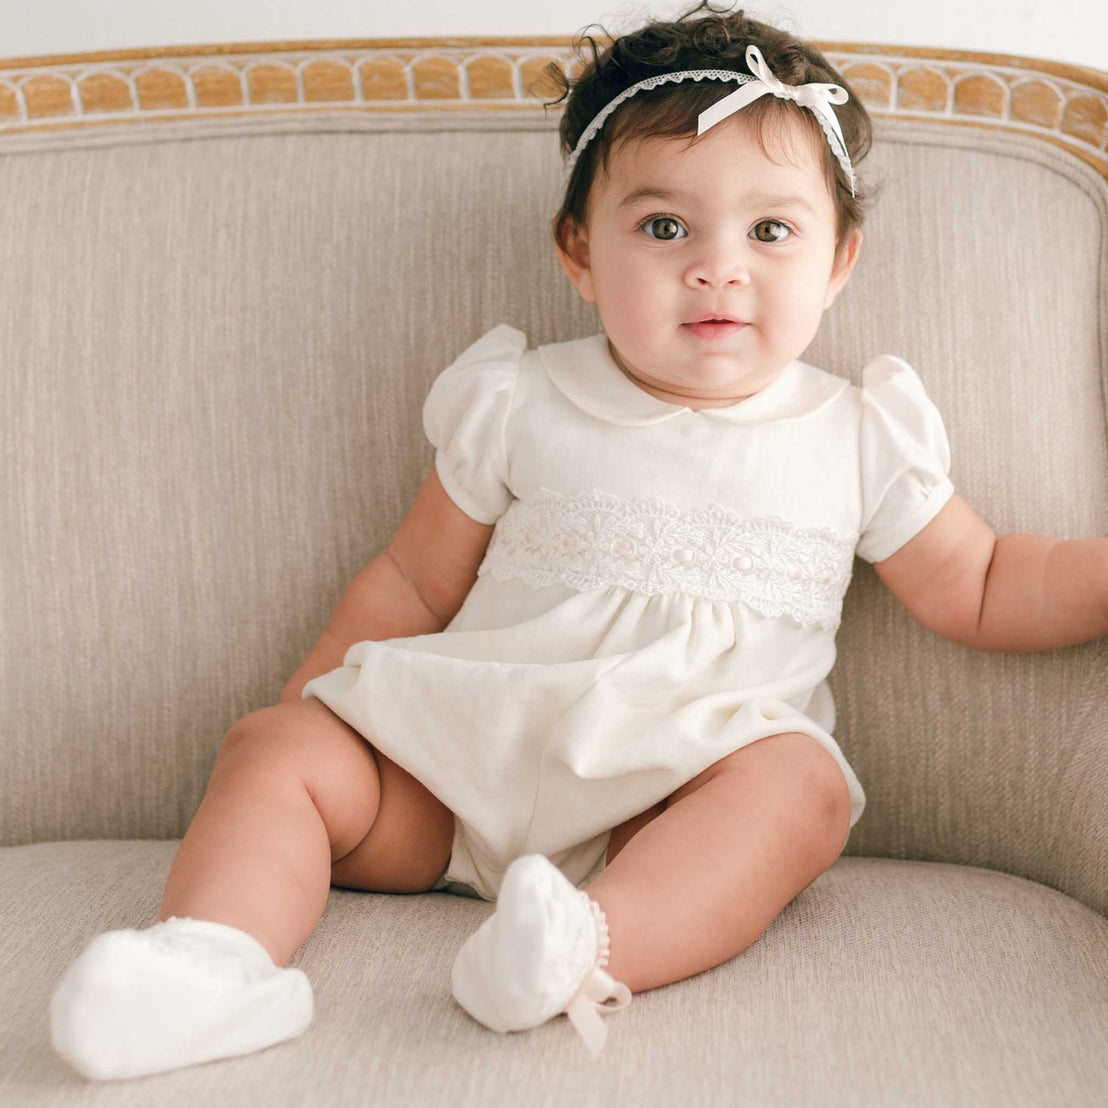 A baby with dark hair and big eyes, wearing the Emma Convertible Skirt & Romper Set, sits on a beige sofa. The baby, dressed for a christening, looks curious and is slightly leaning to one side.